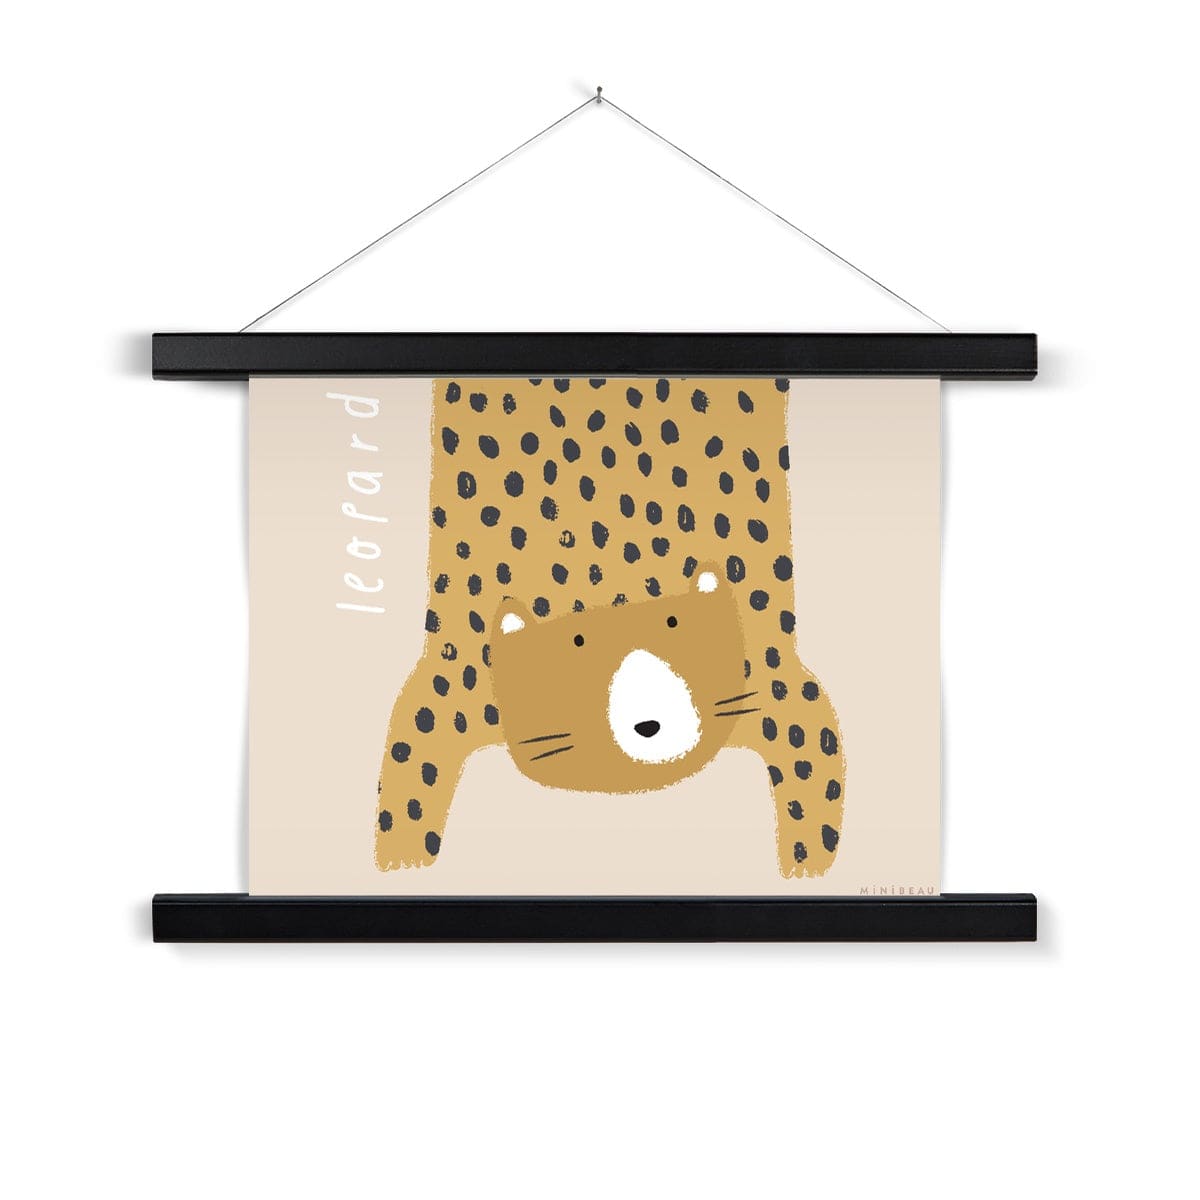 Our Leopard art print shows a hand-drawn leopard hanging down in to the picture, lifting it's head to look out at us on a beige background, with the word leopard written alongside it, in a black wooden hanger, hanging from a nail in a white wall